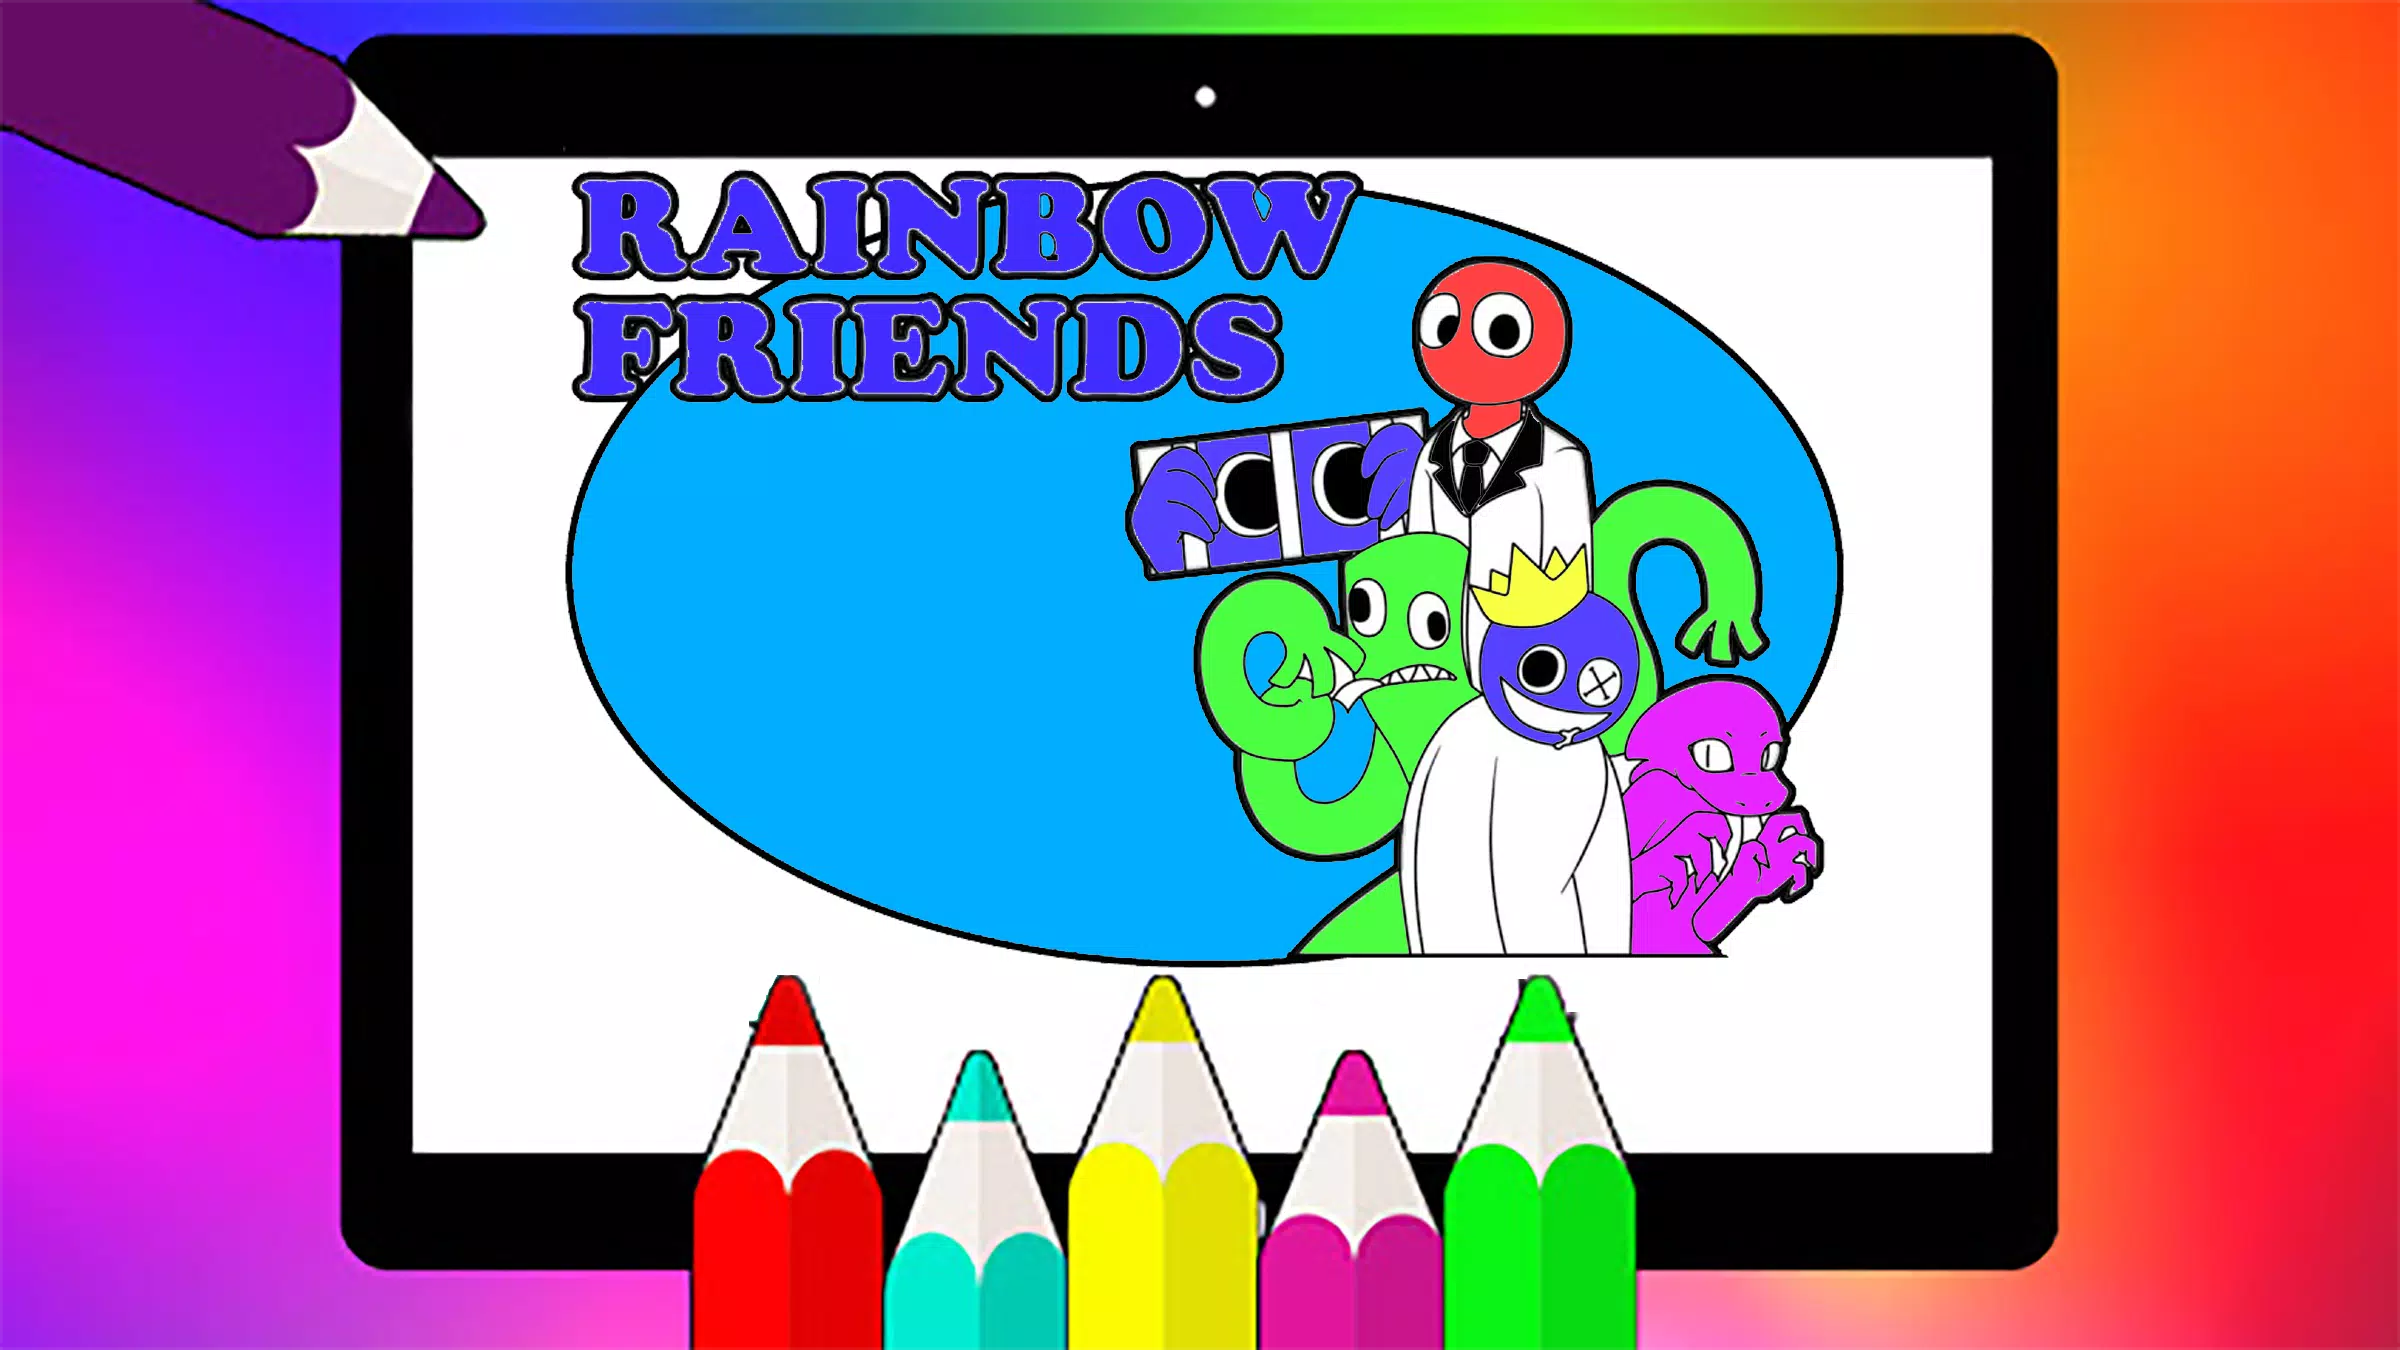 Yellow Rainbow Friends Roblox Coloring Page  Coloring pages for kids,  Coloring pages, Printable coloring pages